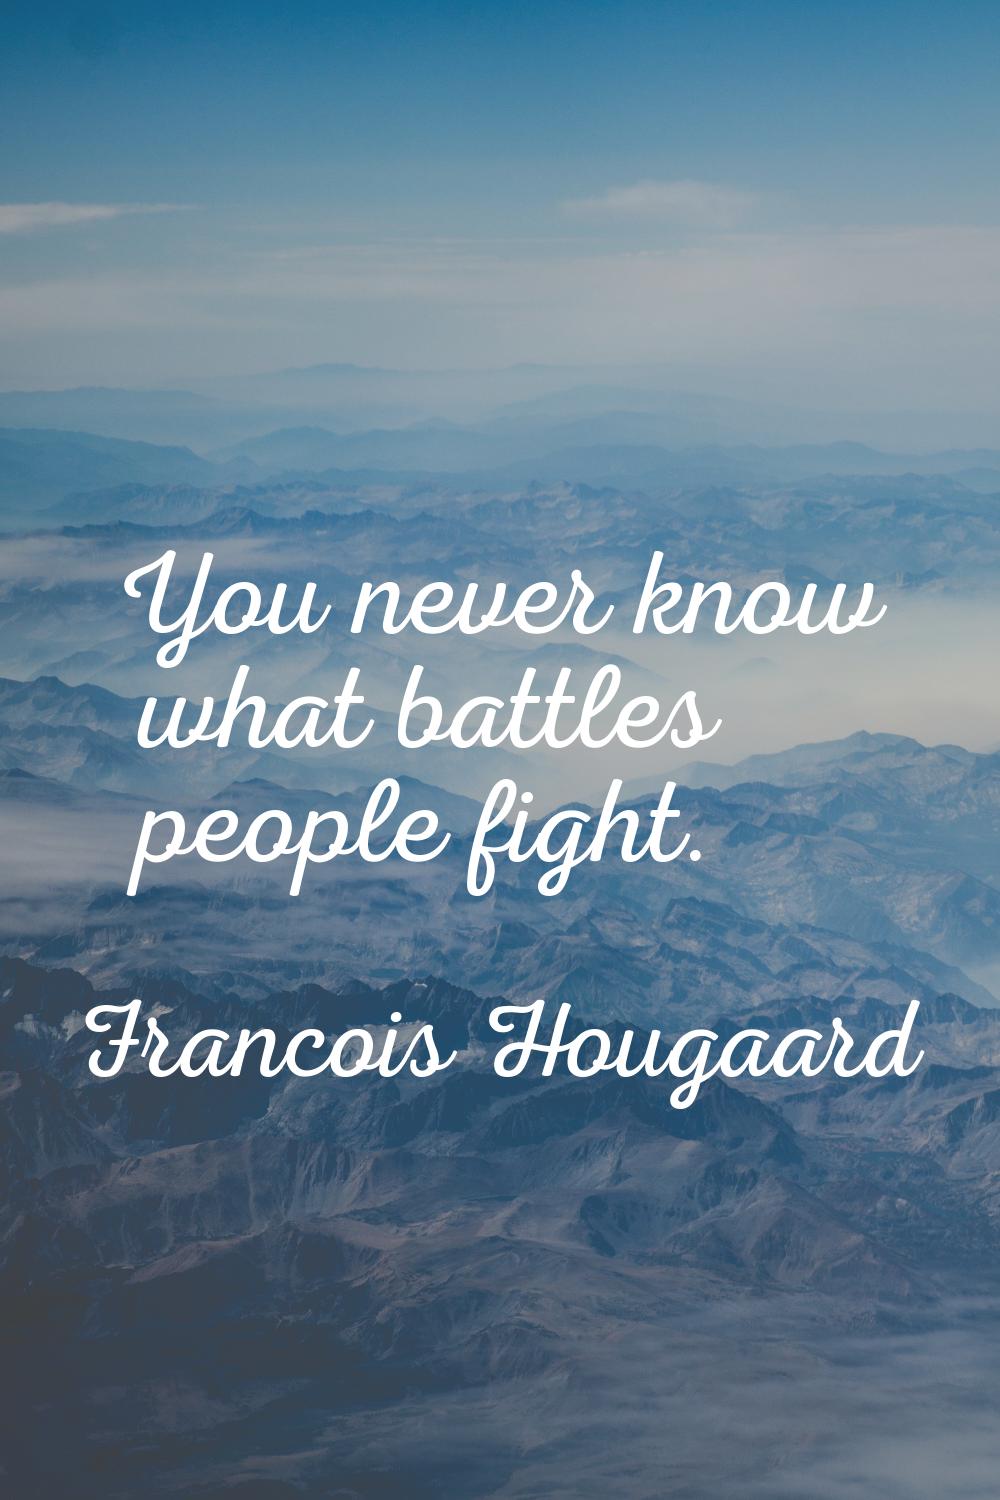 You never know what battles people fight.